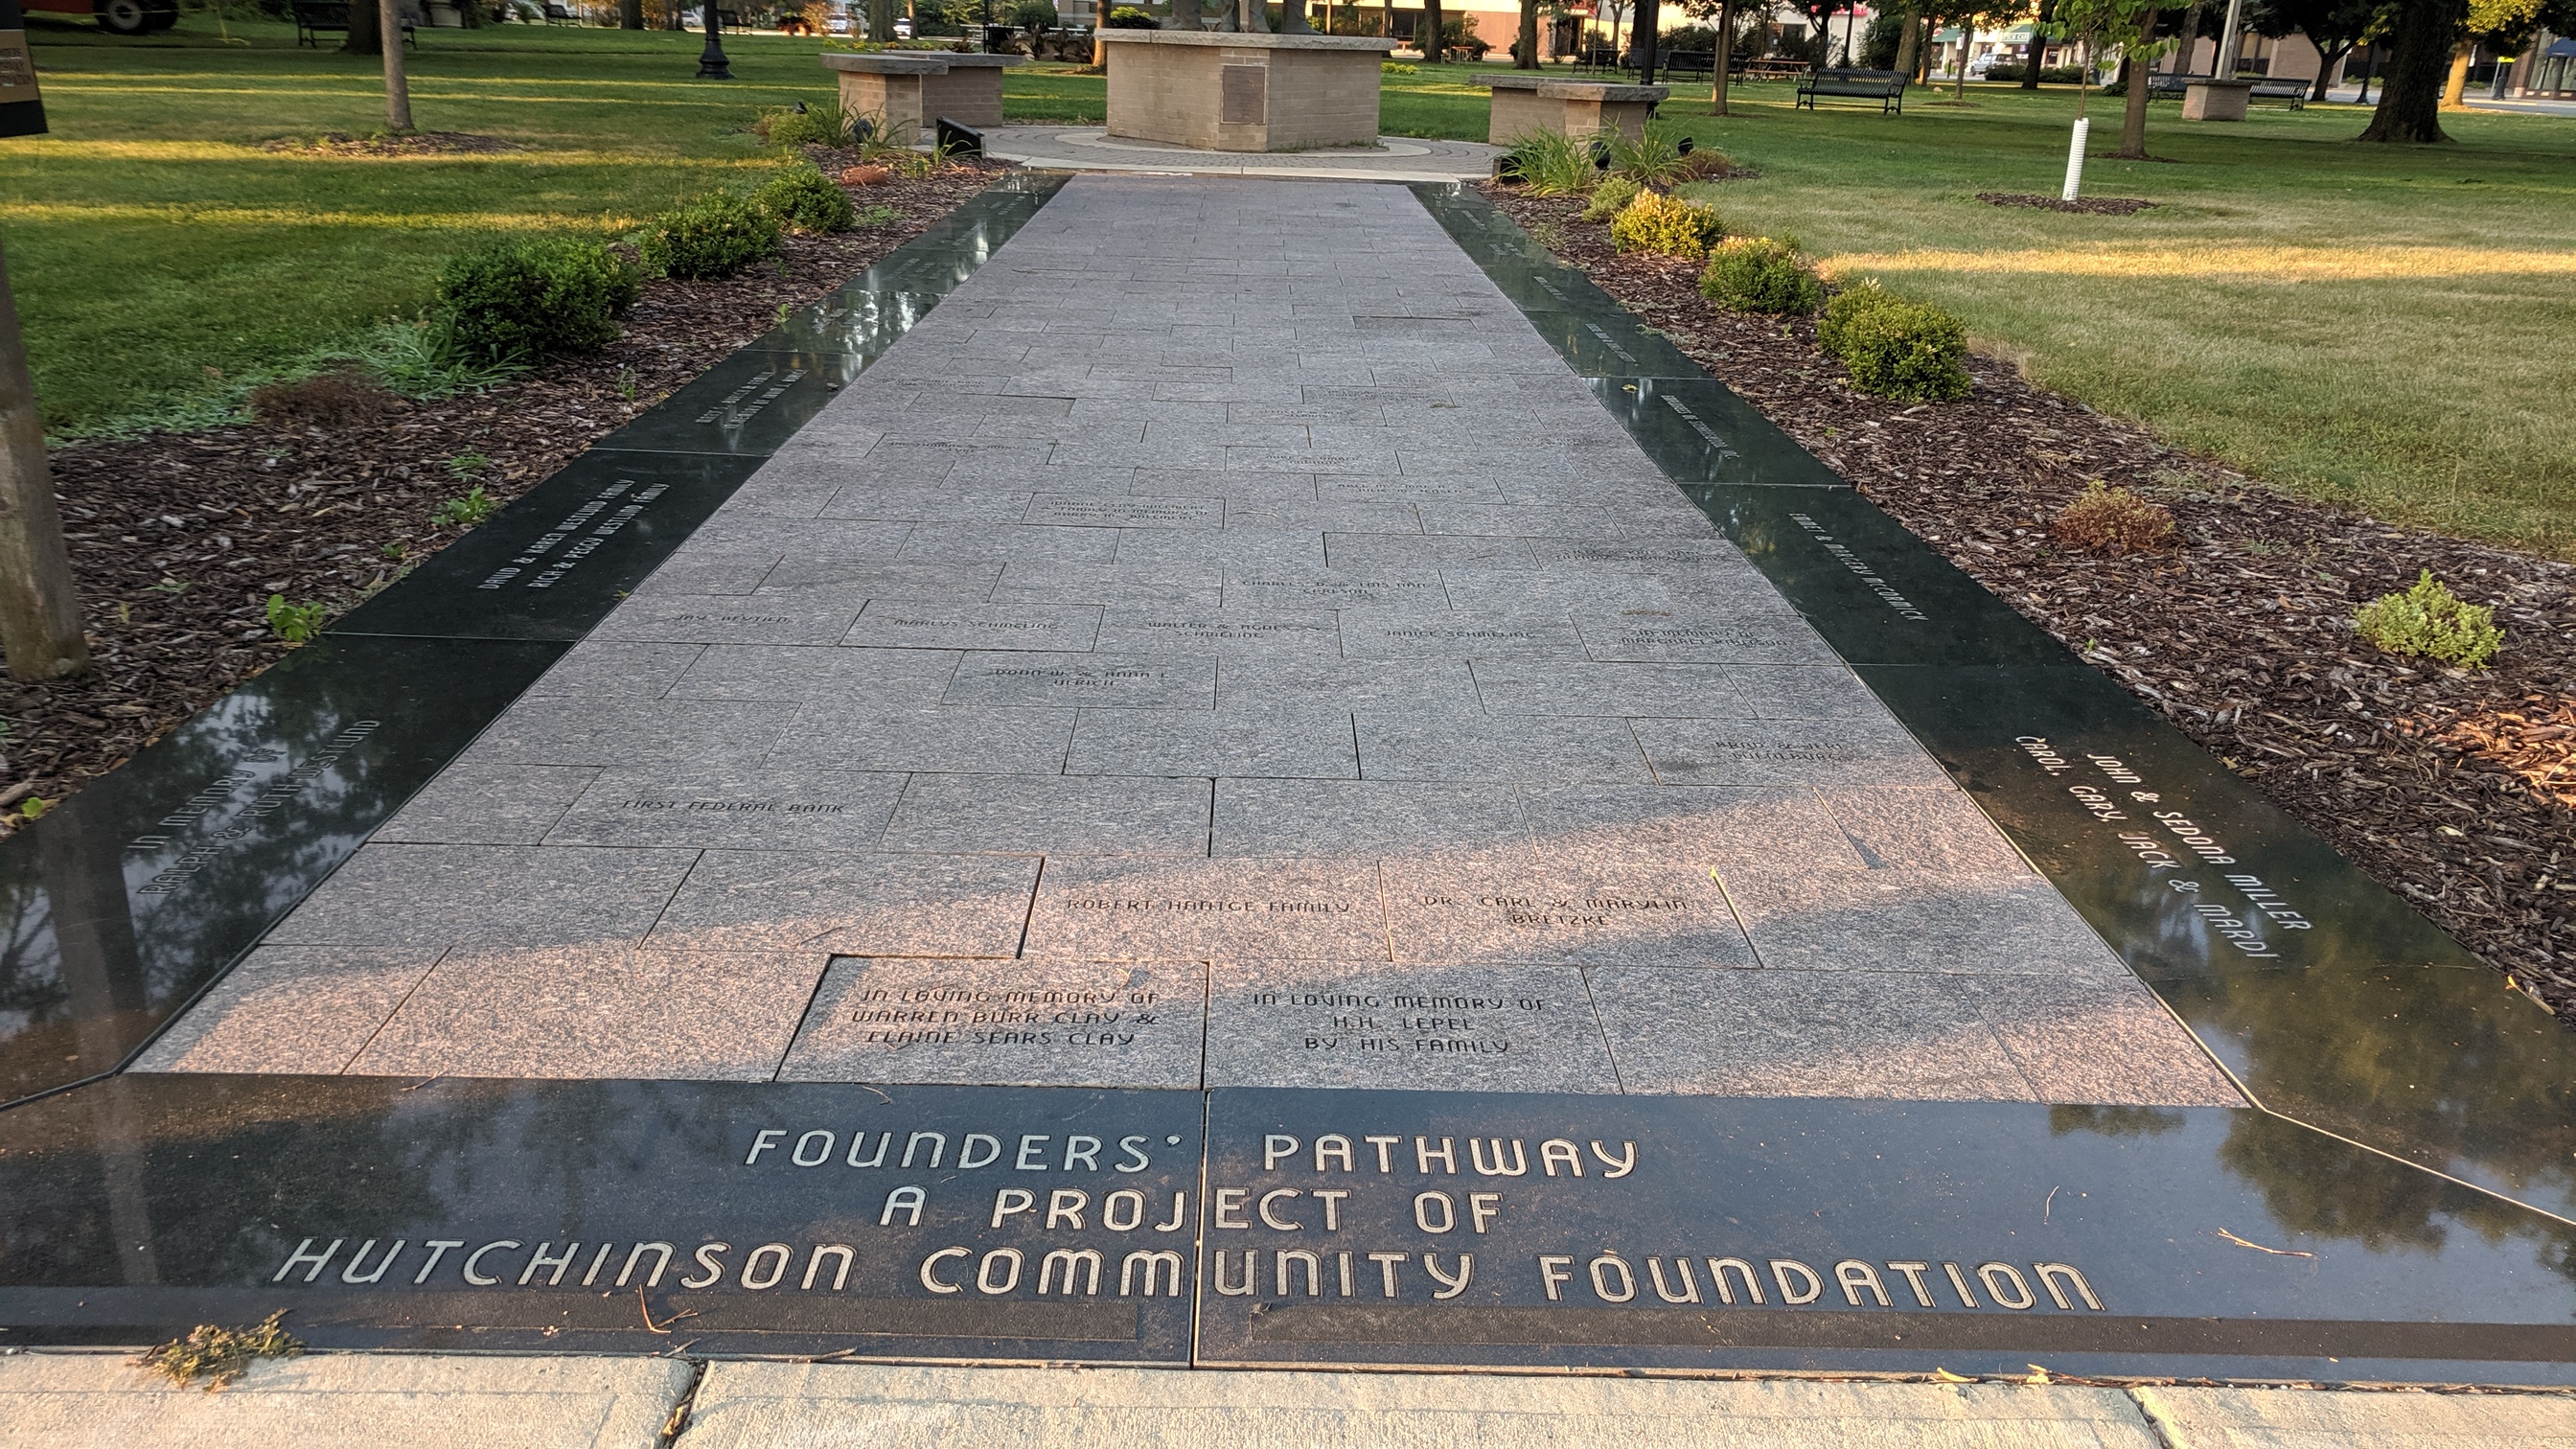 Hutchinson Area Community Foundation Founders Pathway